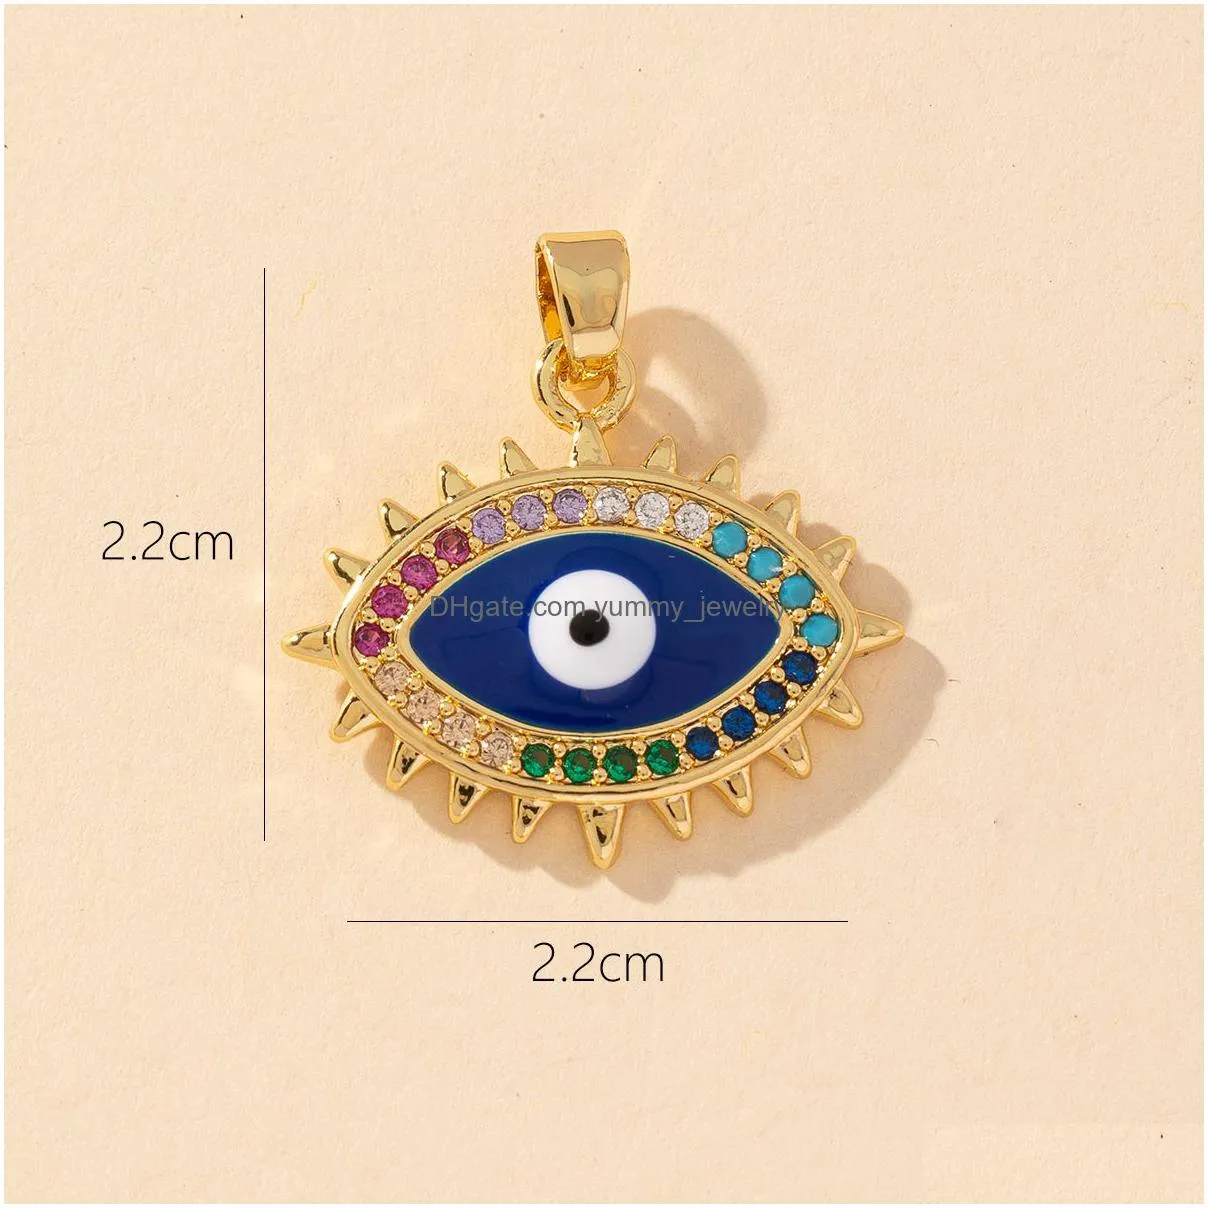 Charms Voleaf Big Blue Evil Eye Charms Pendant For Necklace And Earrings Gold Plated Copper Zircon Jewelry Findings Diy Vjc101 Drop De Dh2Sj